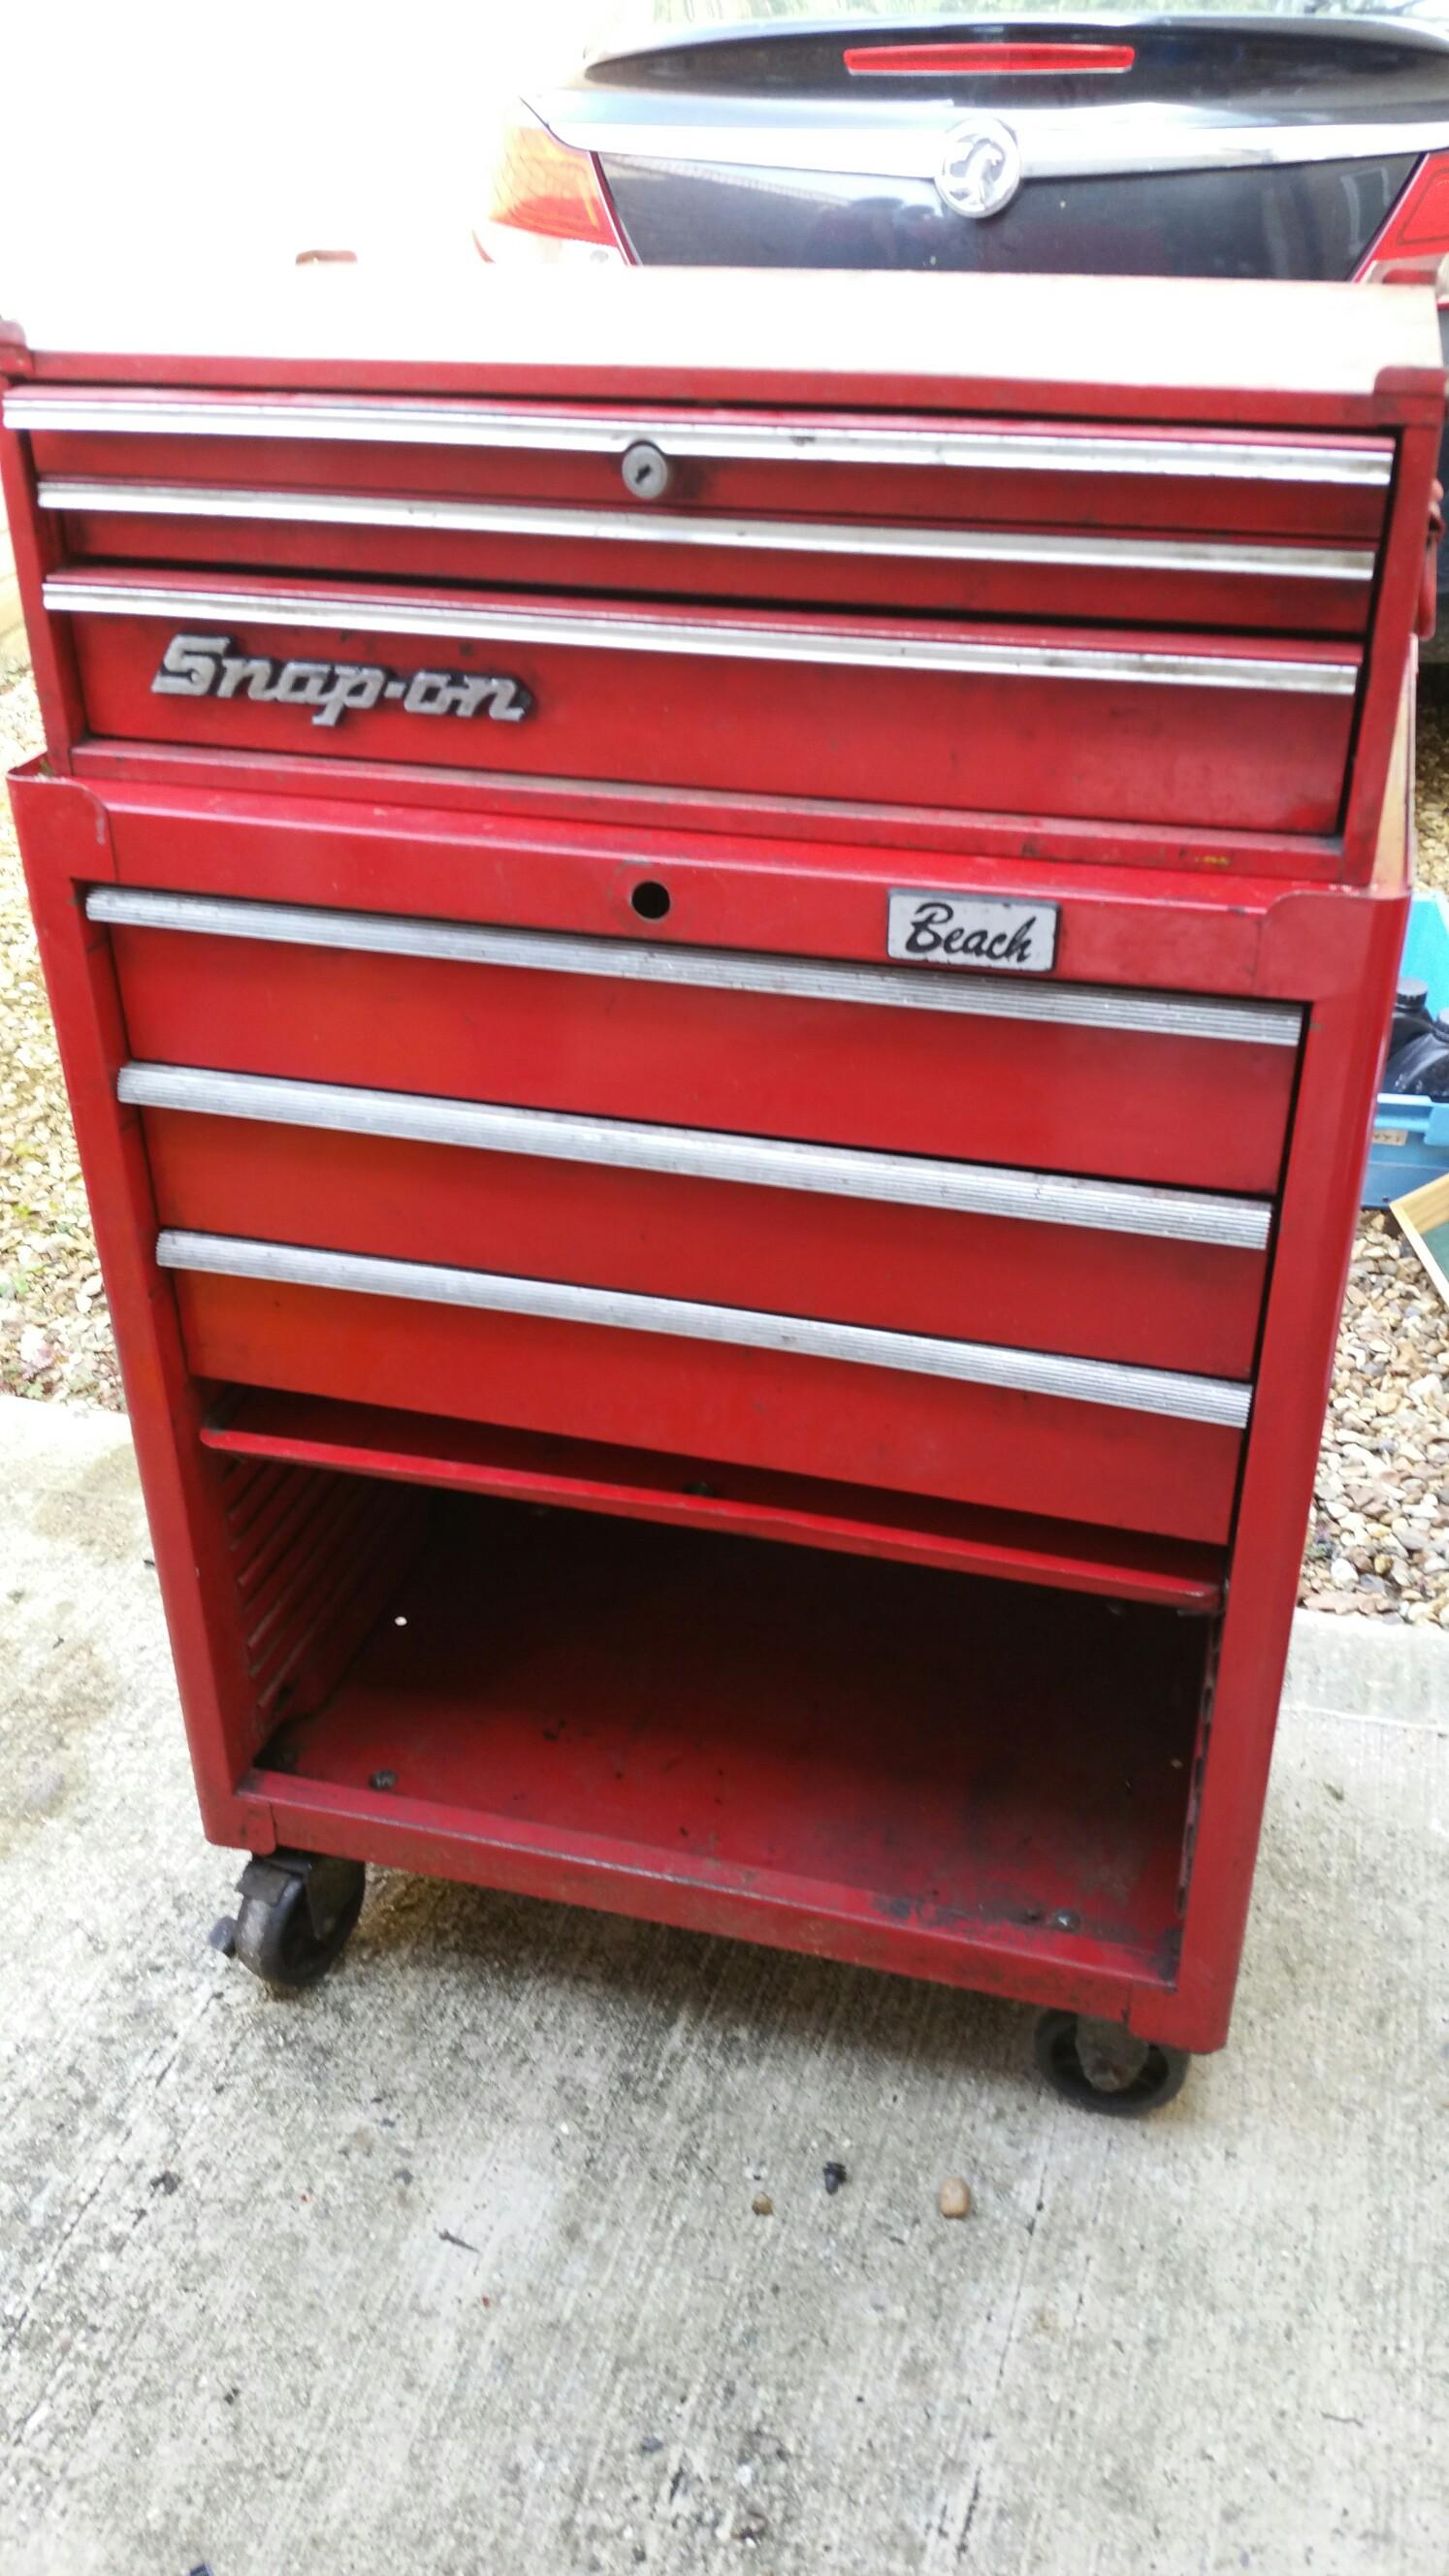 2 Snap On Tool Boxes And Beach Roller Cabine In Cb6 Wilburton For